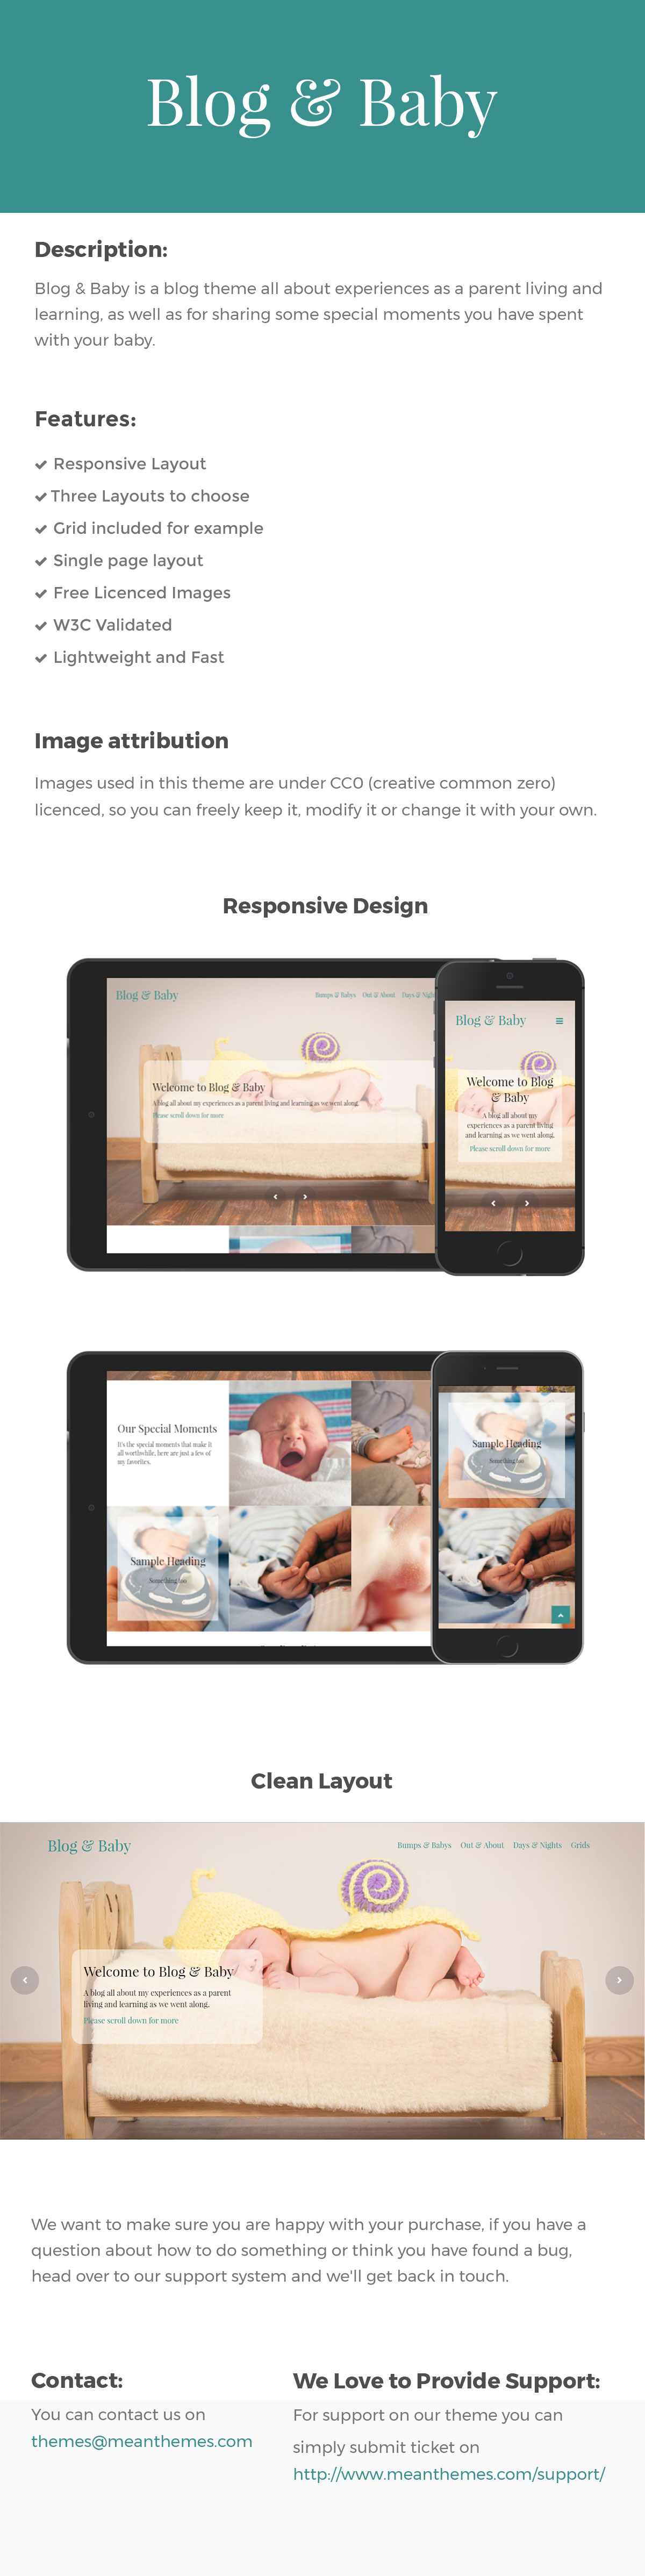 Blog & Baby - Responsive HTML Template For Baby Blogs - 1